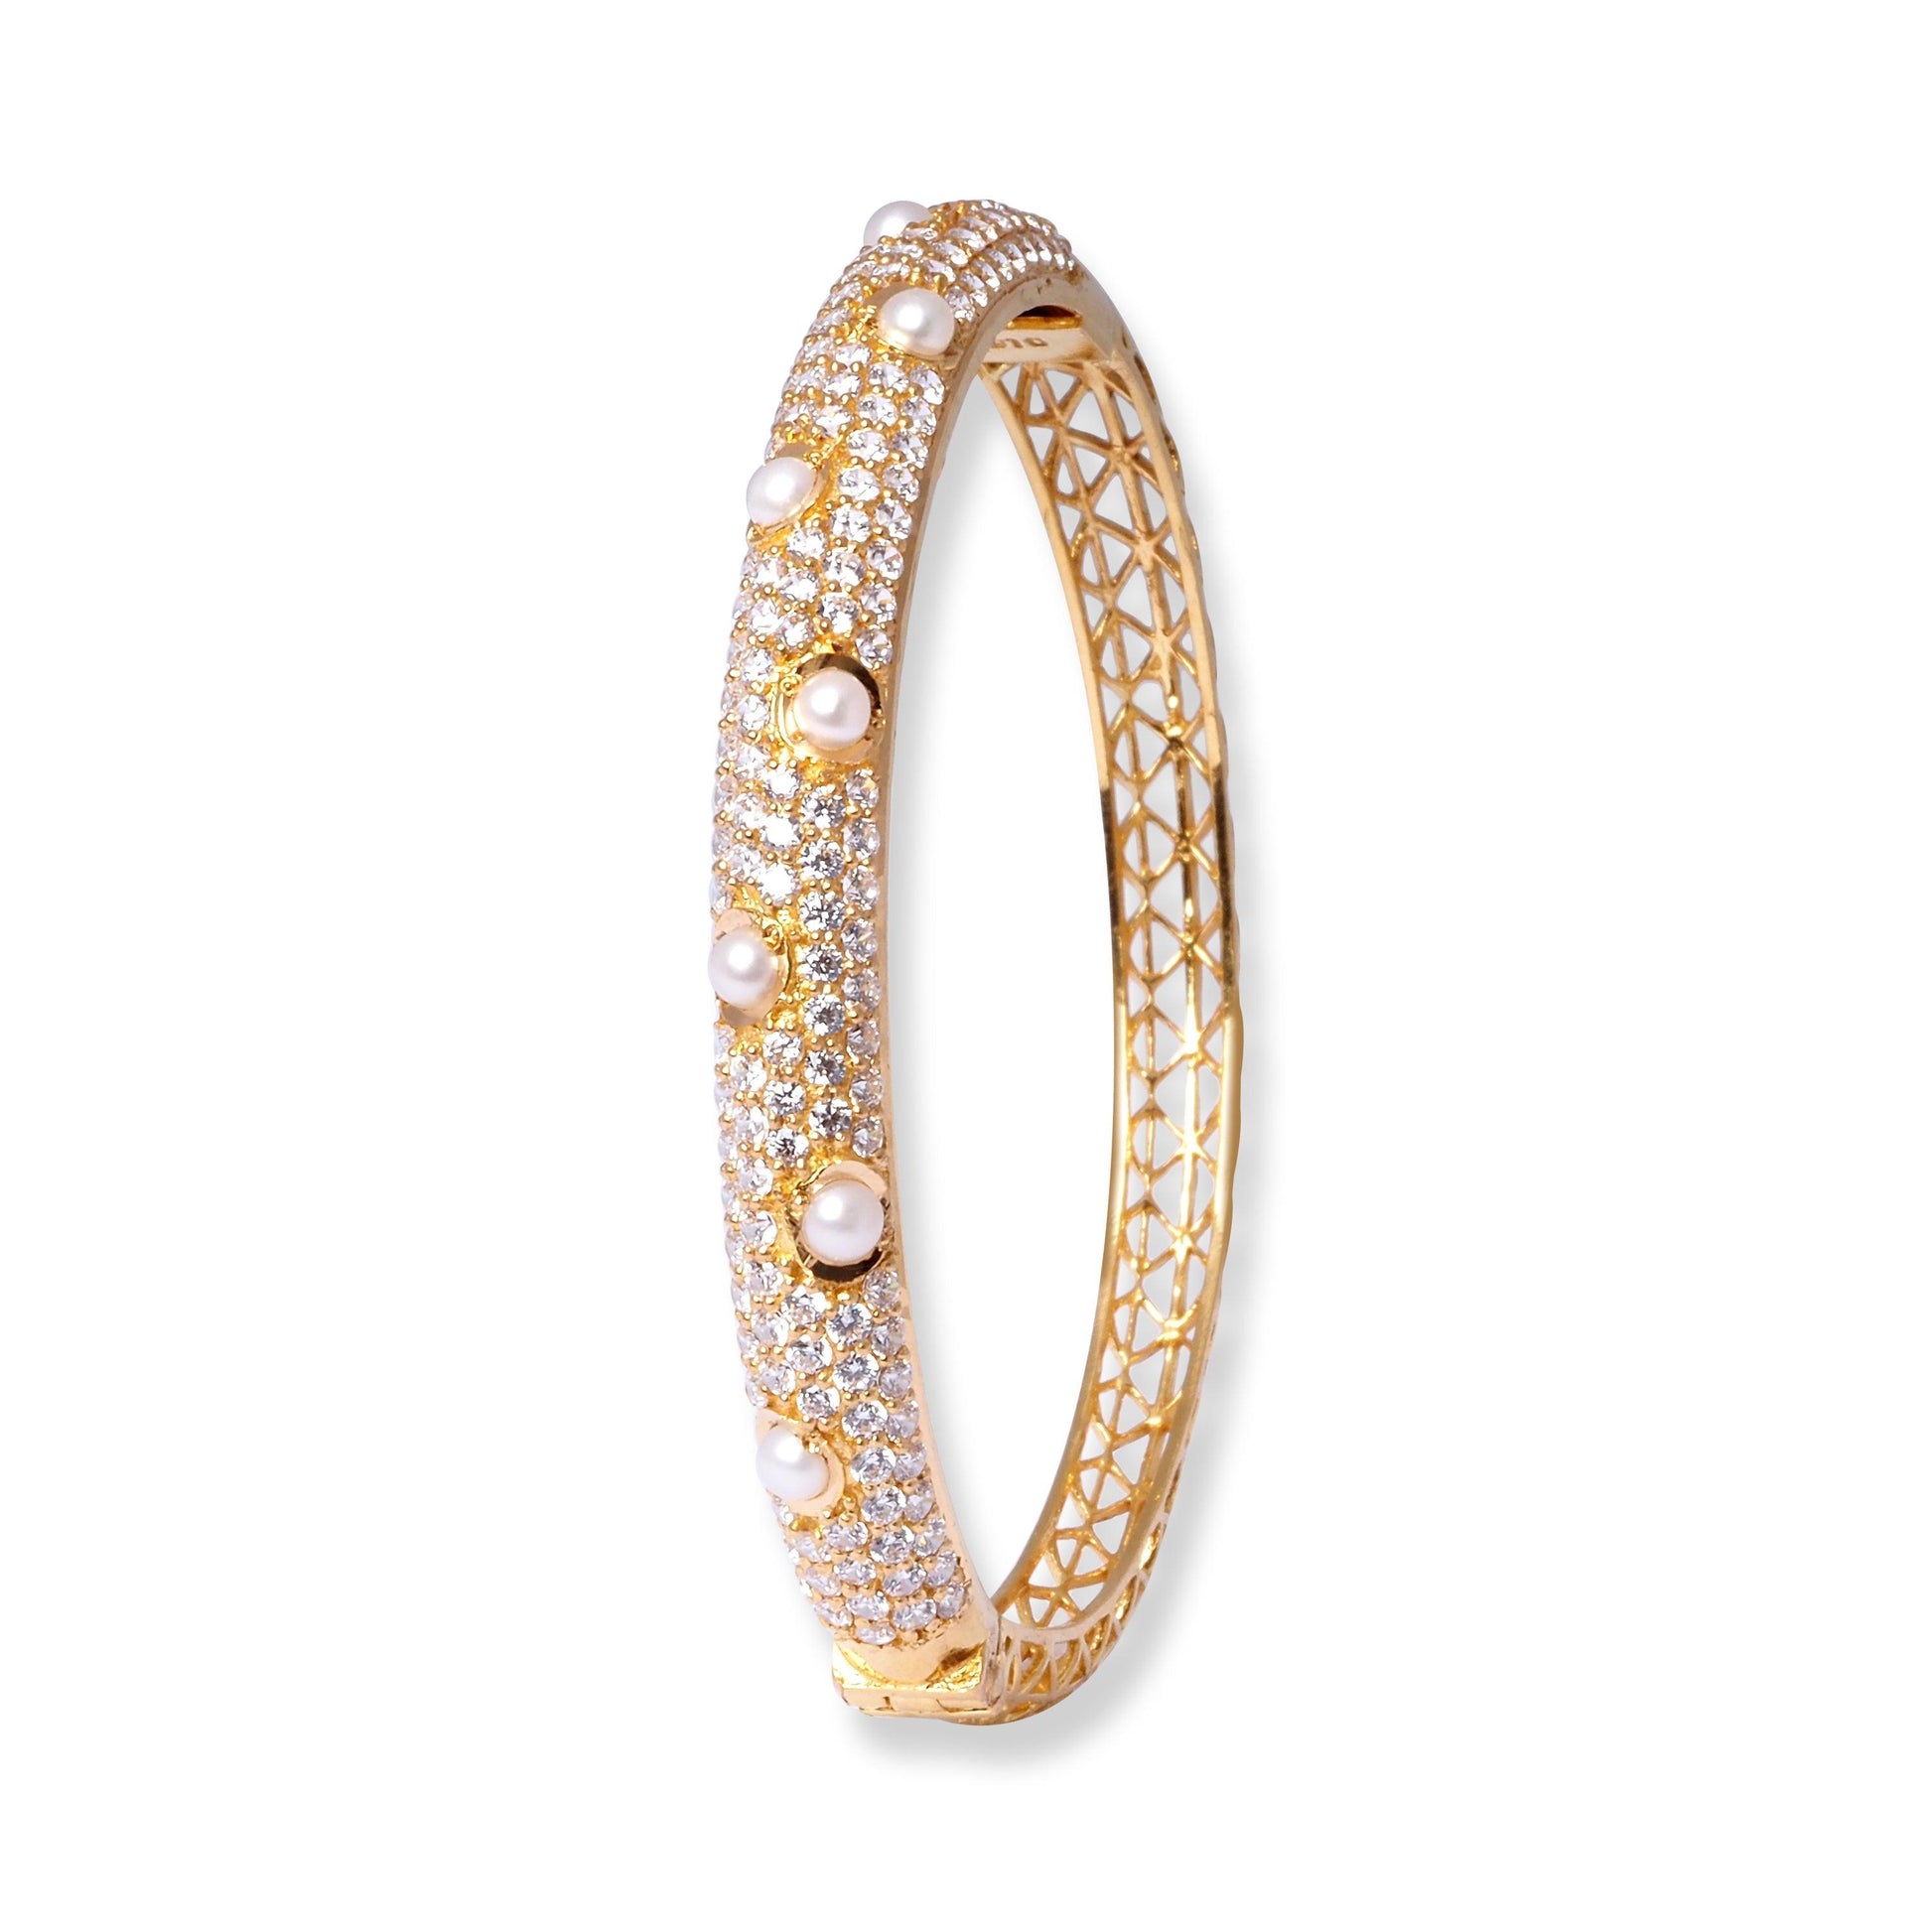 22ct Gold Openable Bangle with Cultured Pearls and Cubic Zirconia Stones B-8556 - Minar Jewellers